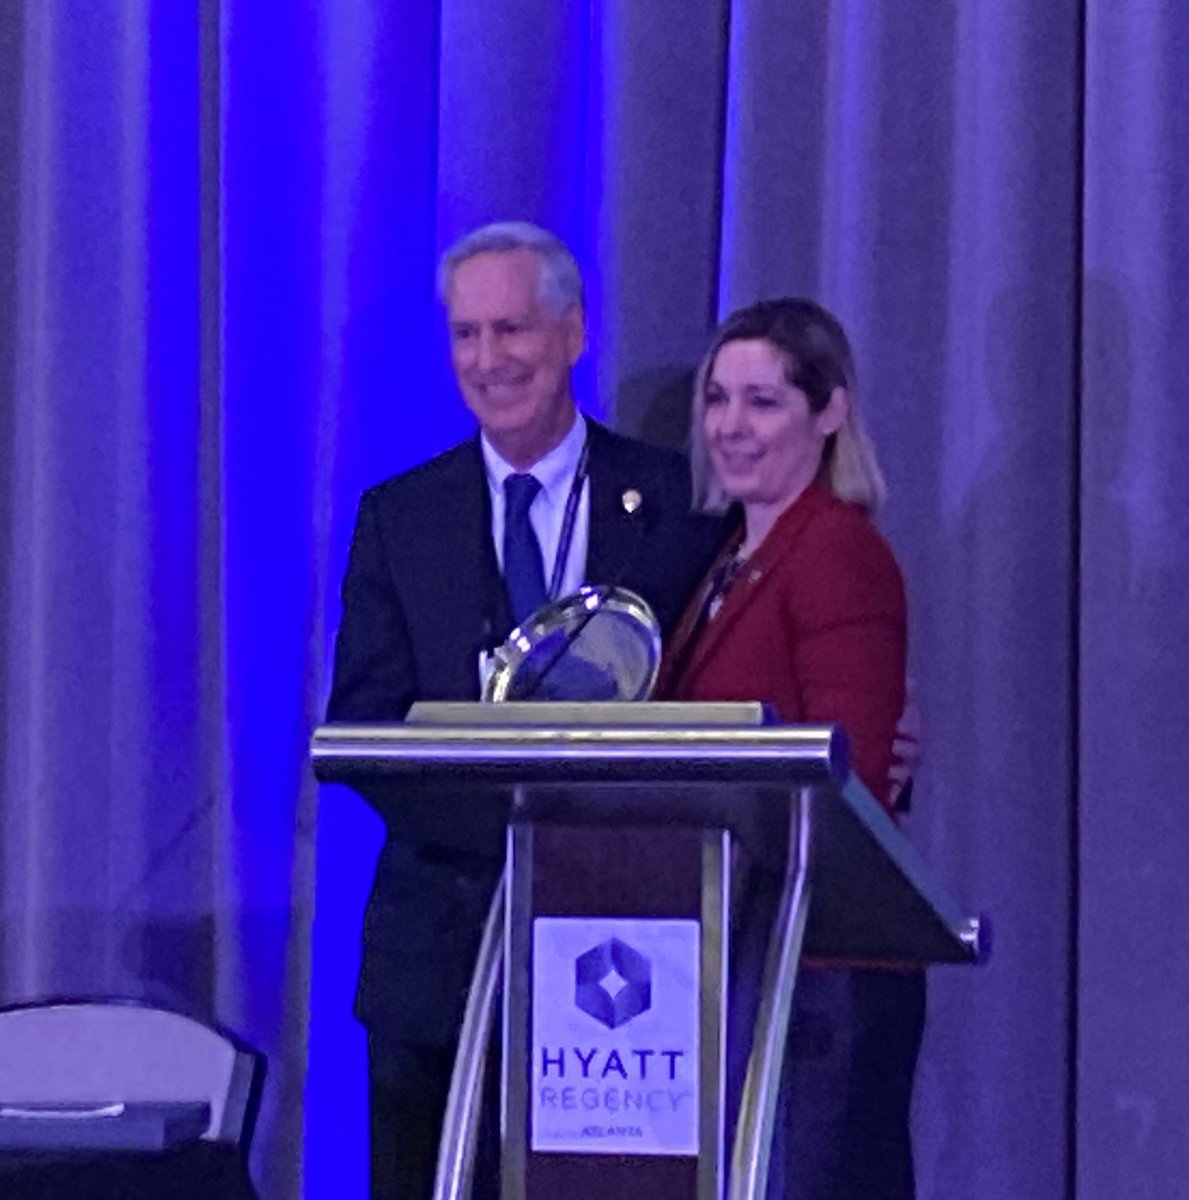 ⁦@ACCinTouch⁩ Board of Governors meeting opening with Chair ⁦@NicoleLohrMD⁩ honoring President ⁦@HadleyWilsonMD⁩ for his outstanding service. Thank you Hadley! ⁦@CathieBiga⁩ ⁦@JamalRanaMD⁩ ⁦@himavidula⁩ ⁦@drmalissawood⁩ ⁦⁦